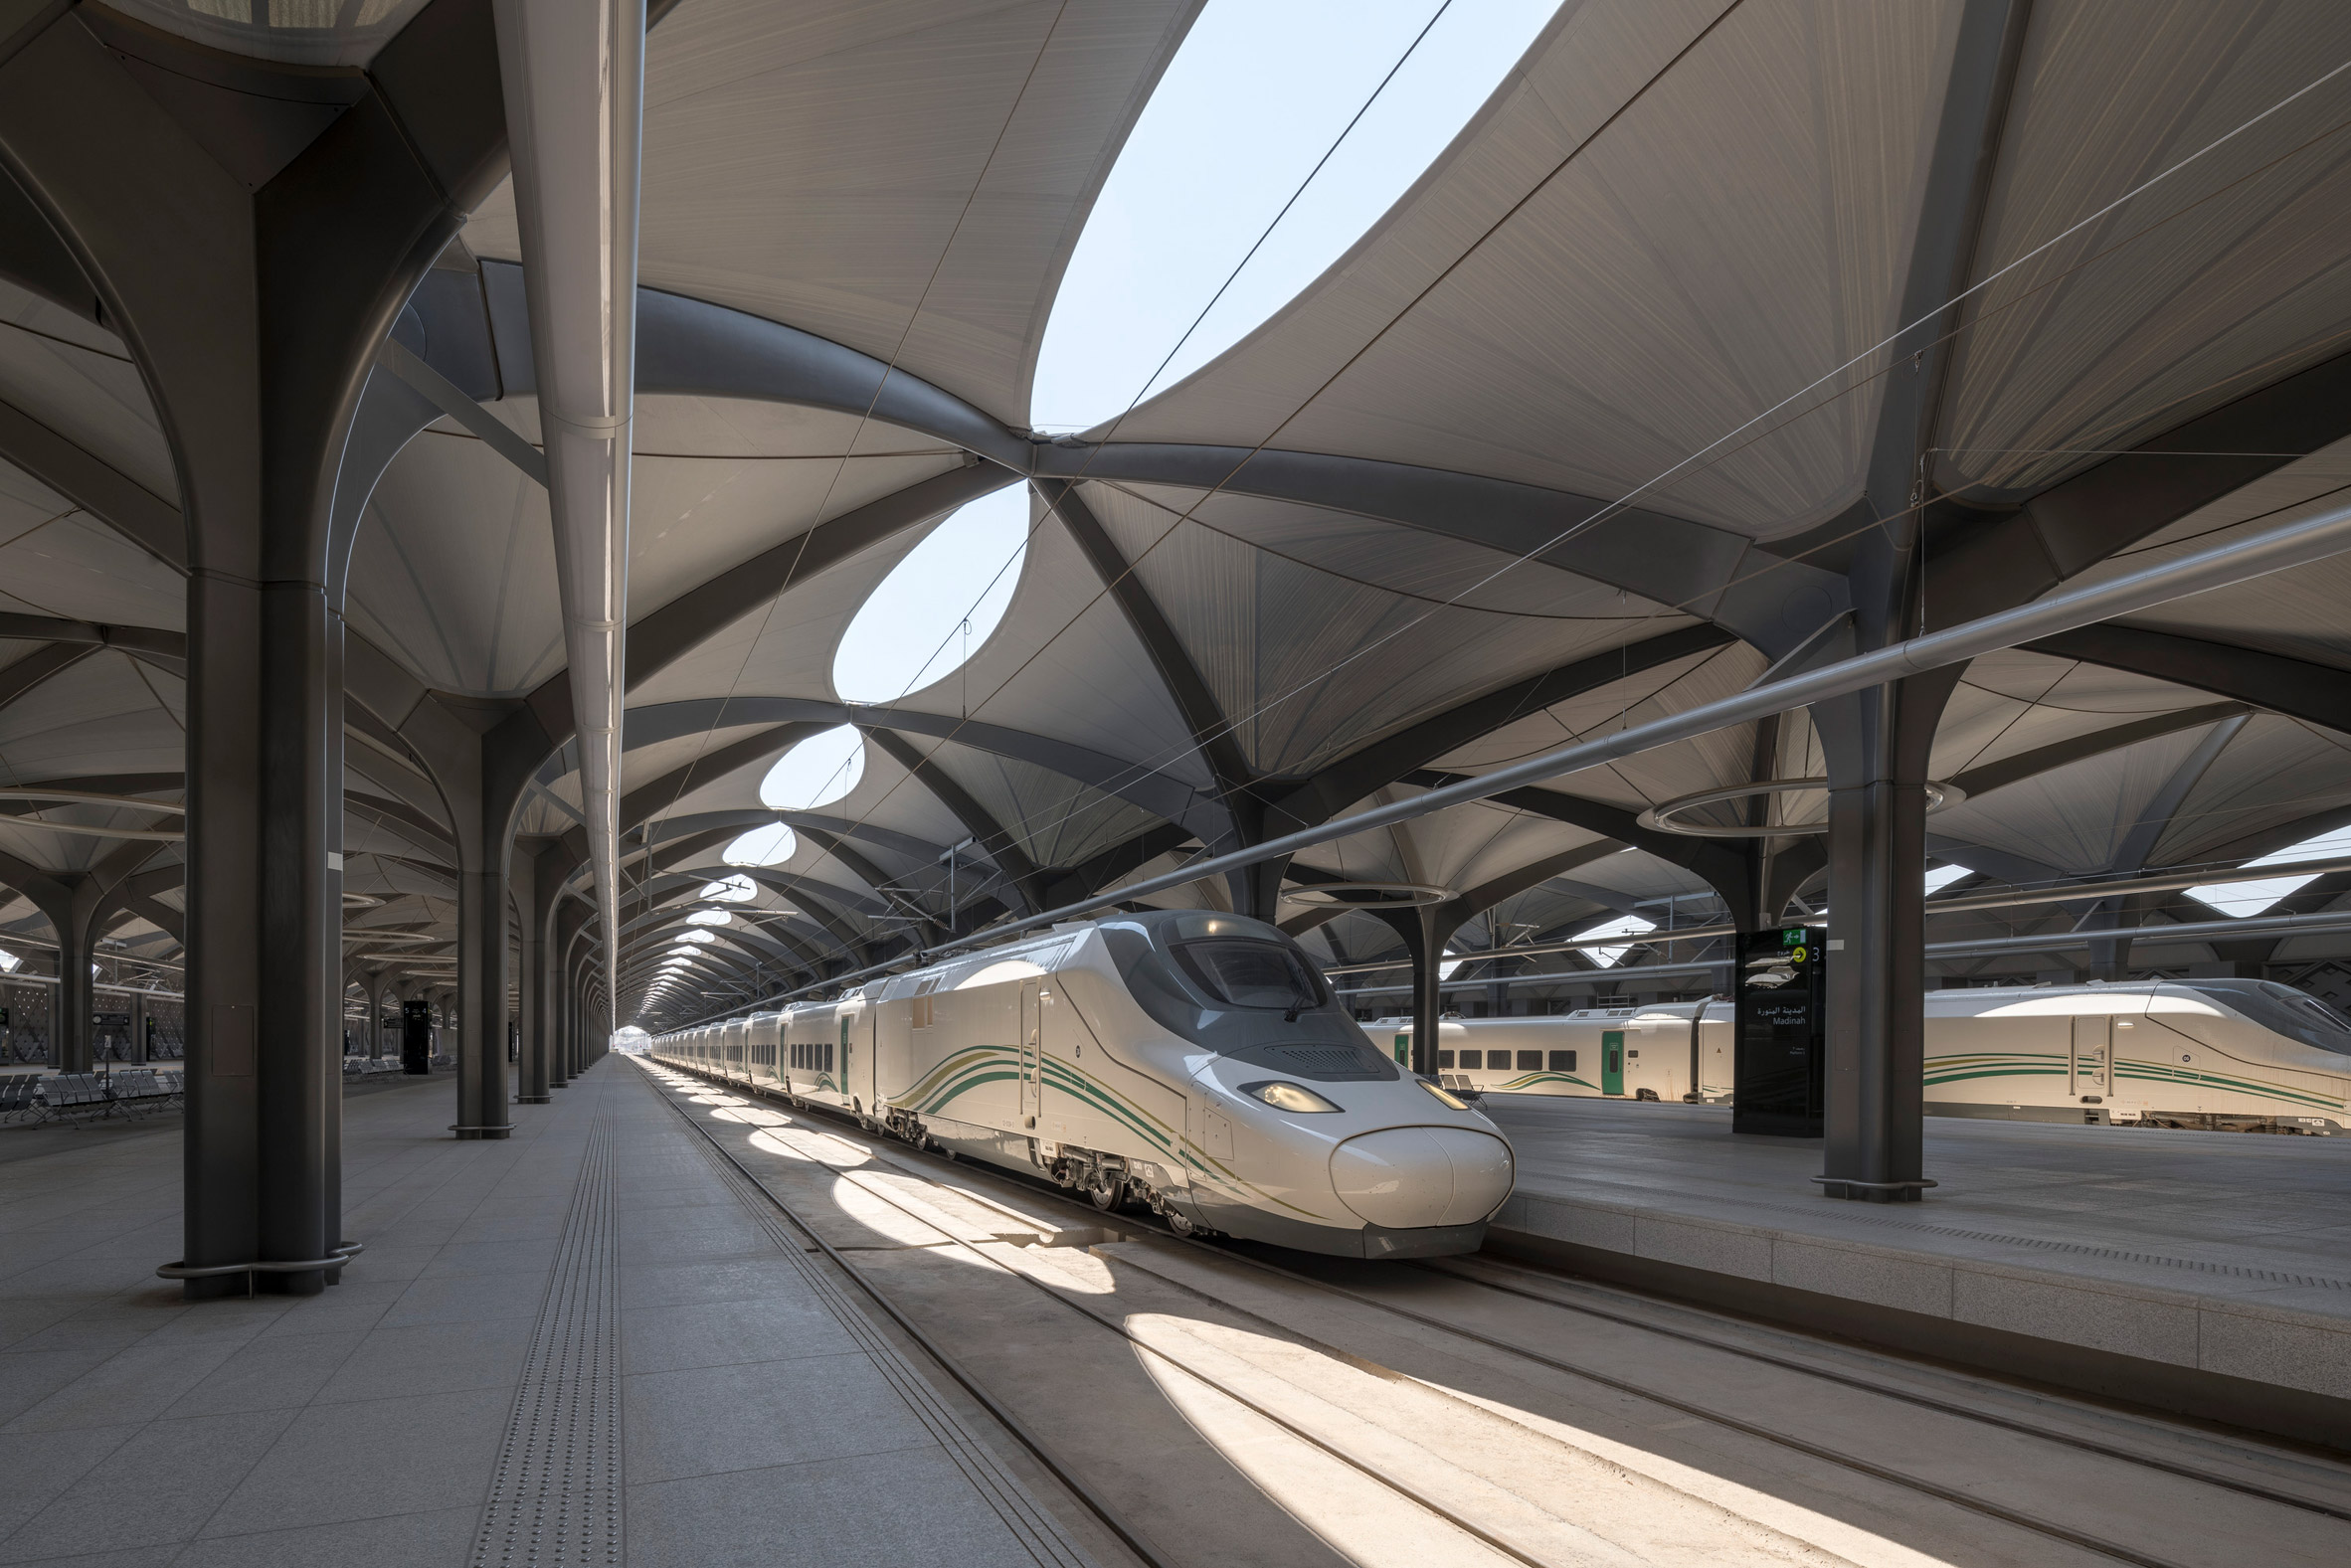 Stations in Mecca, Medina, Jeddah and King Abdullah Economic City on the Haramain high-speed rail line Saudi Arabia by Foster + Partners